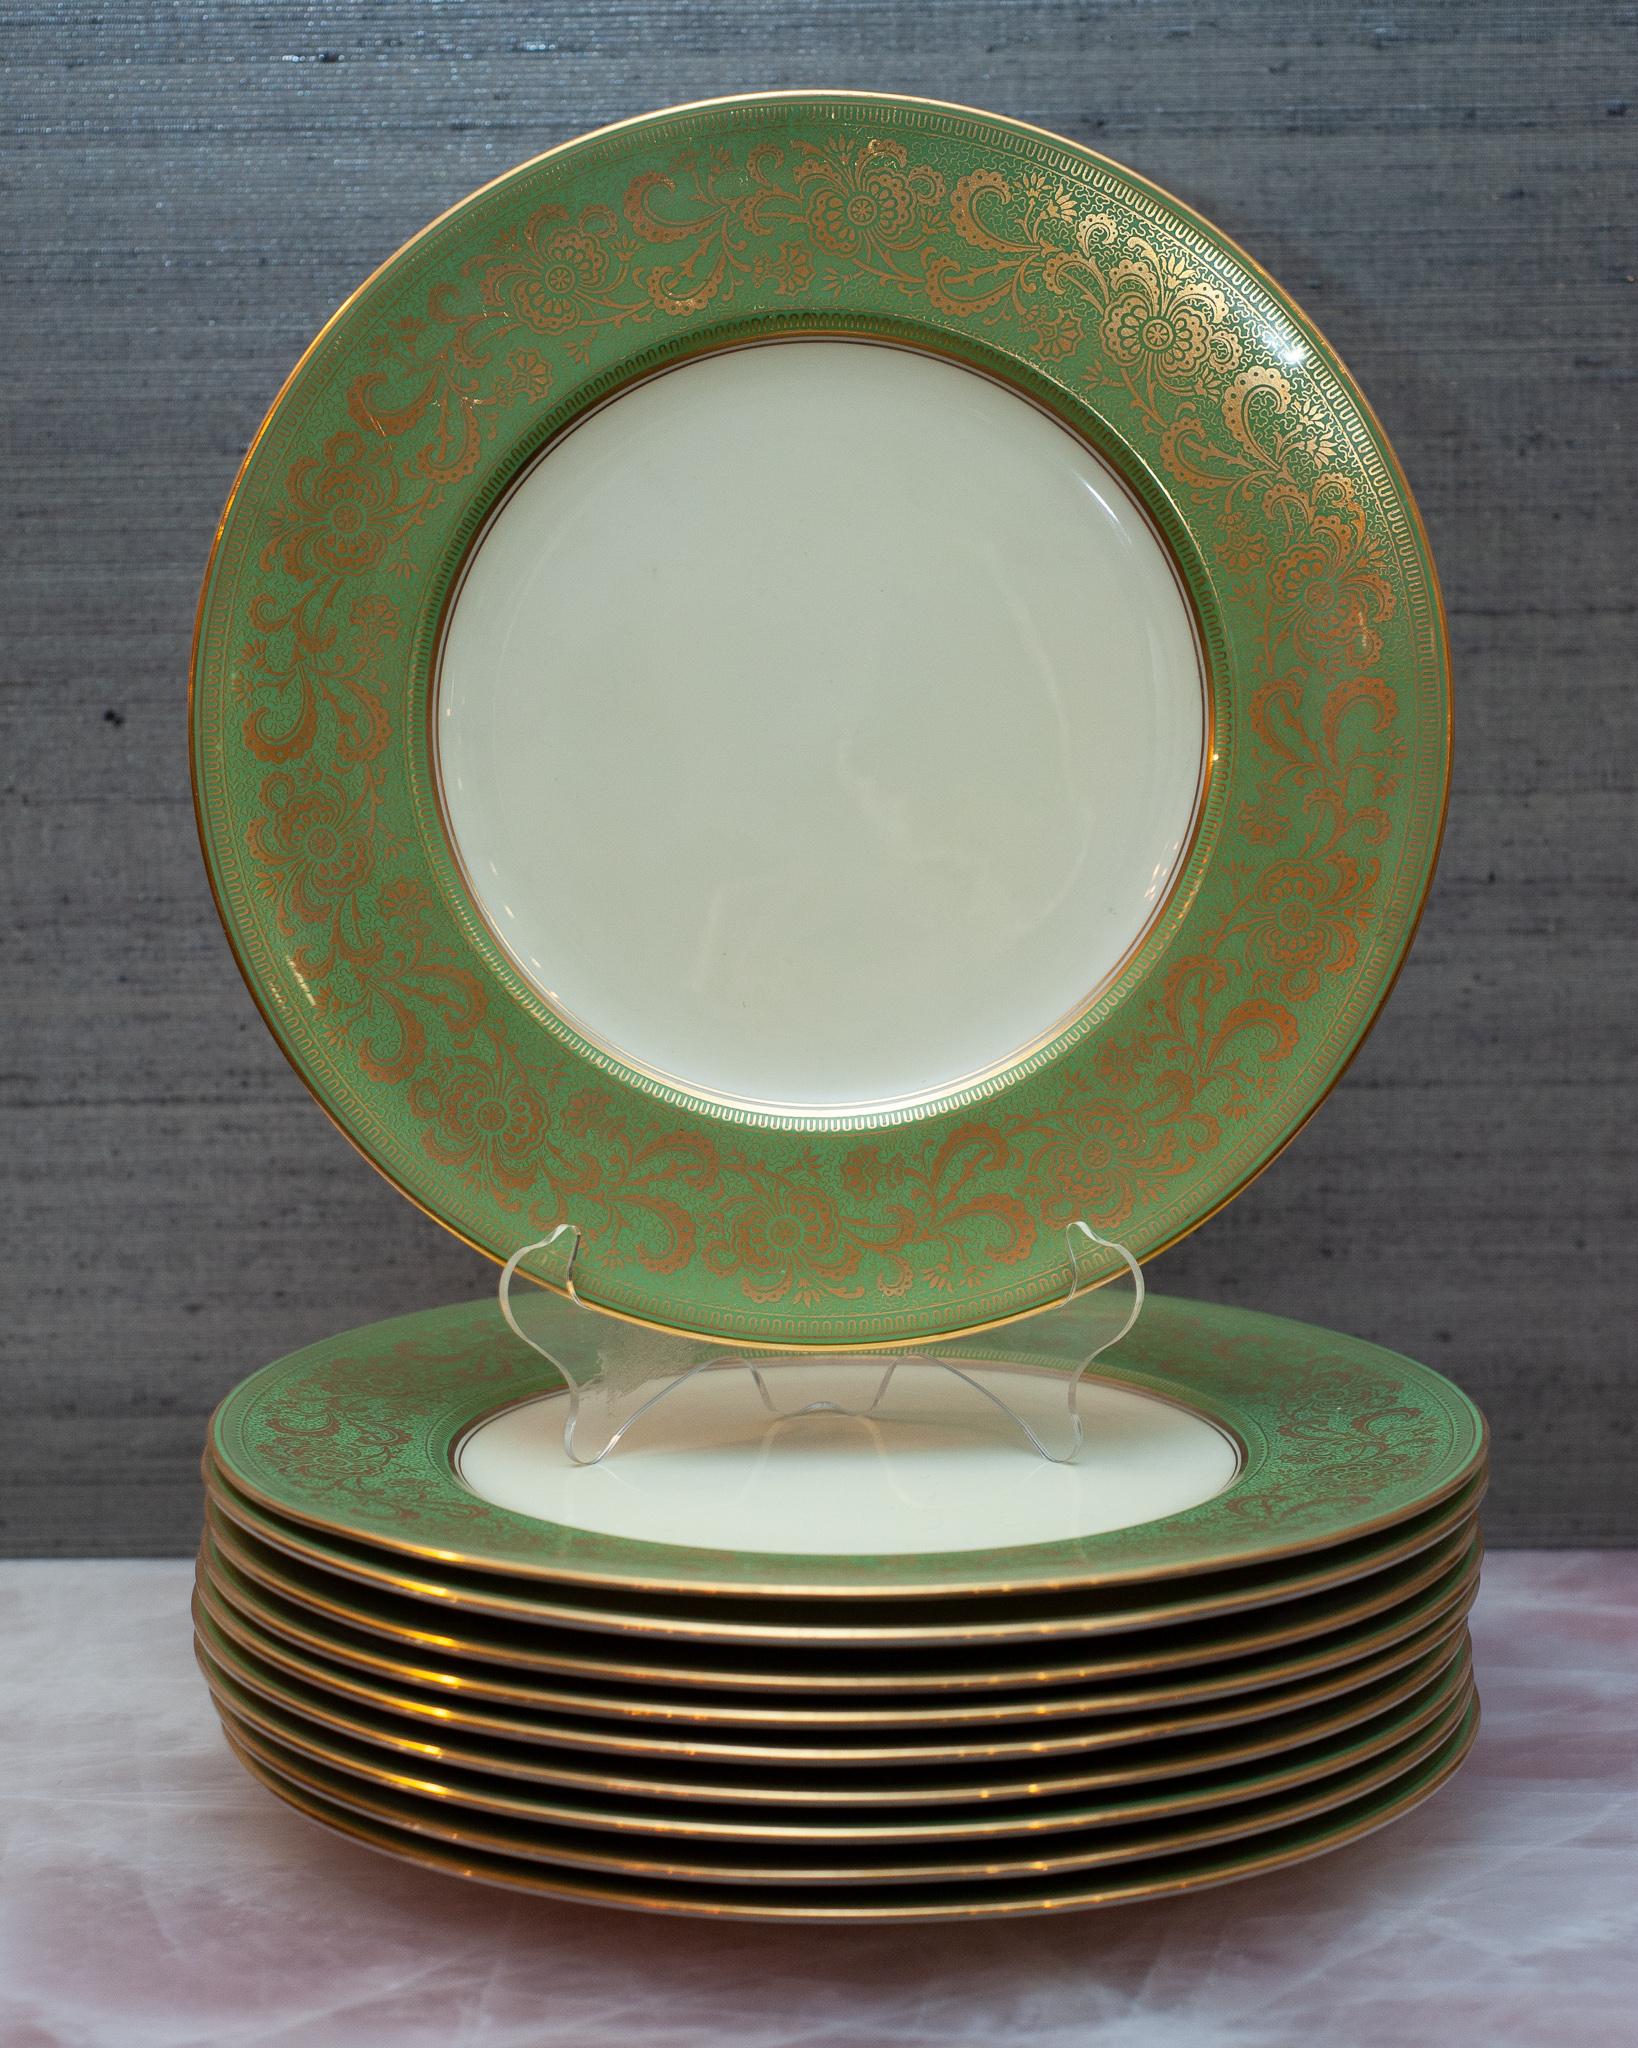 A beautiful set of 10 Antique green and gold dinner plates by Cauldon England for Reizenstein and Sons, Pittsburg. 